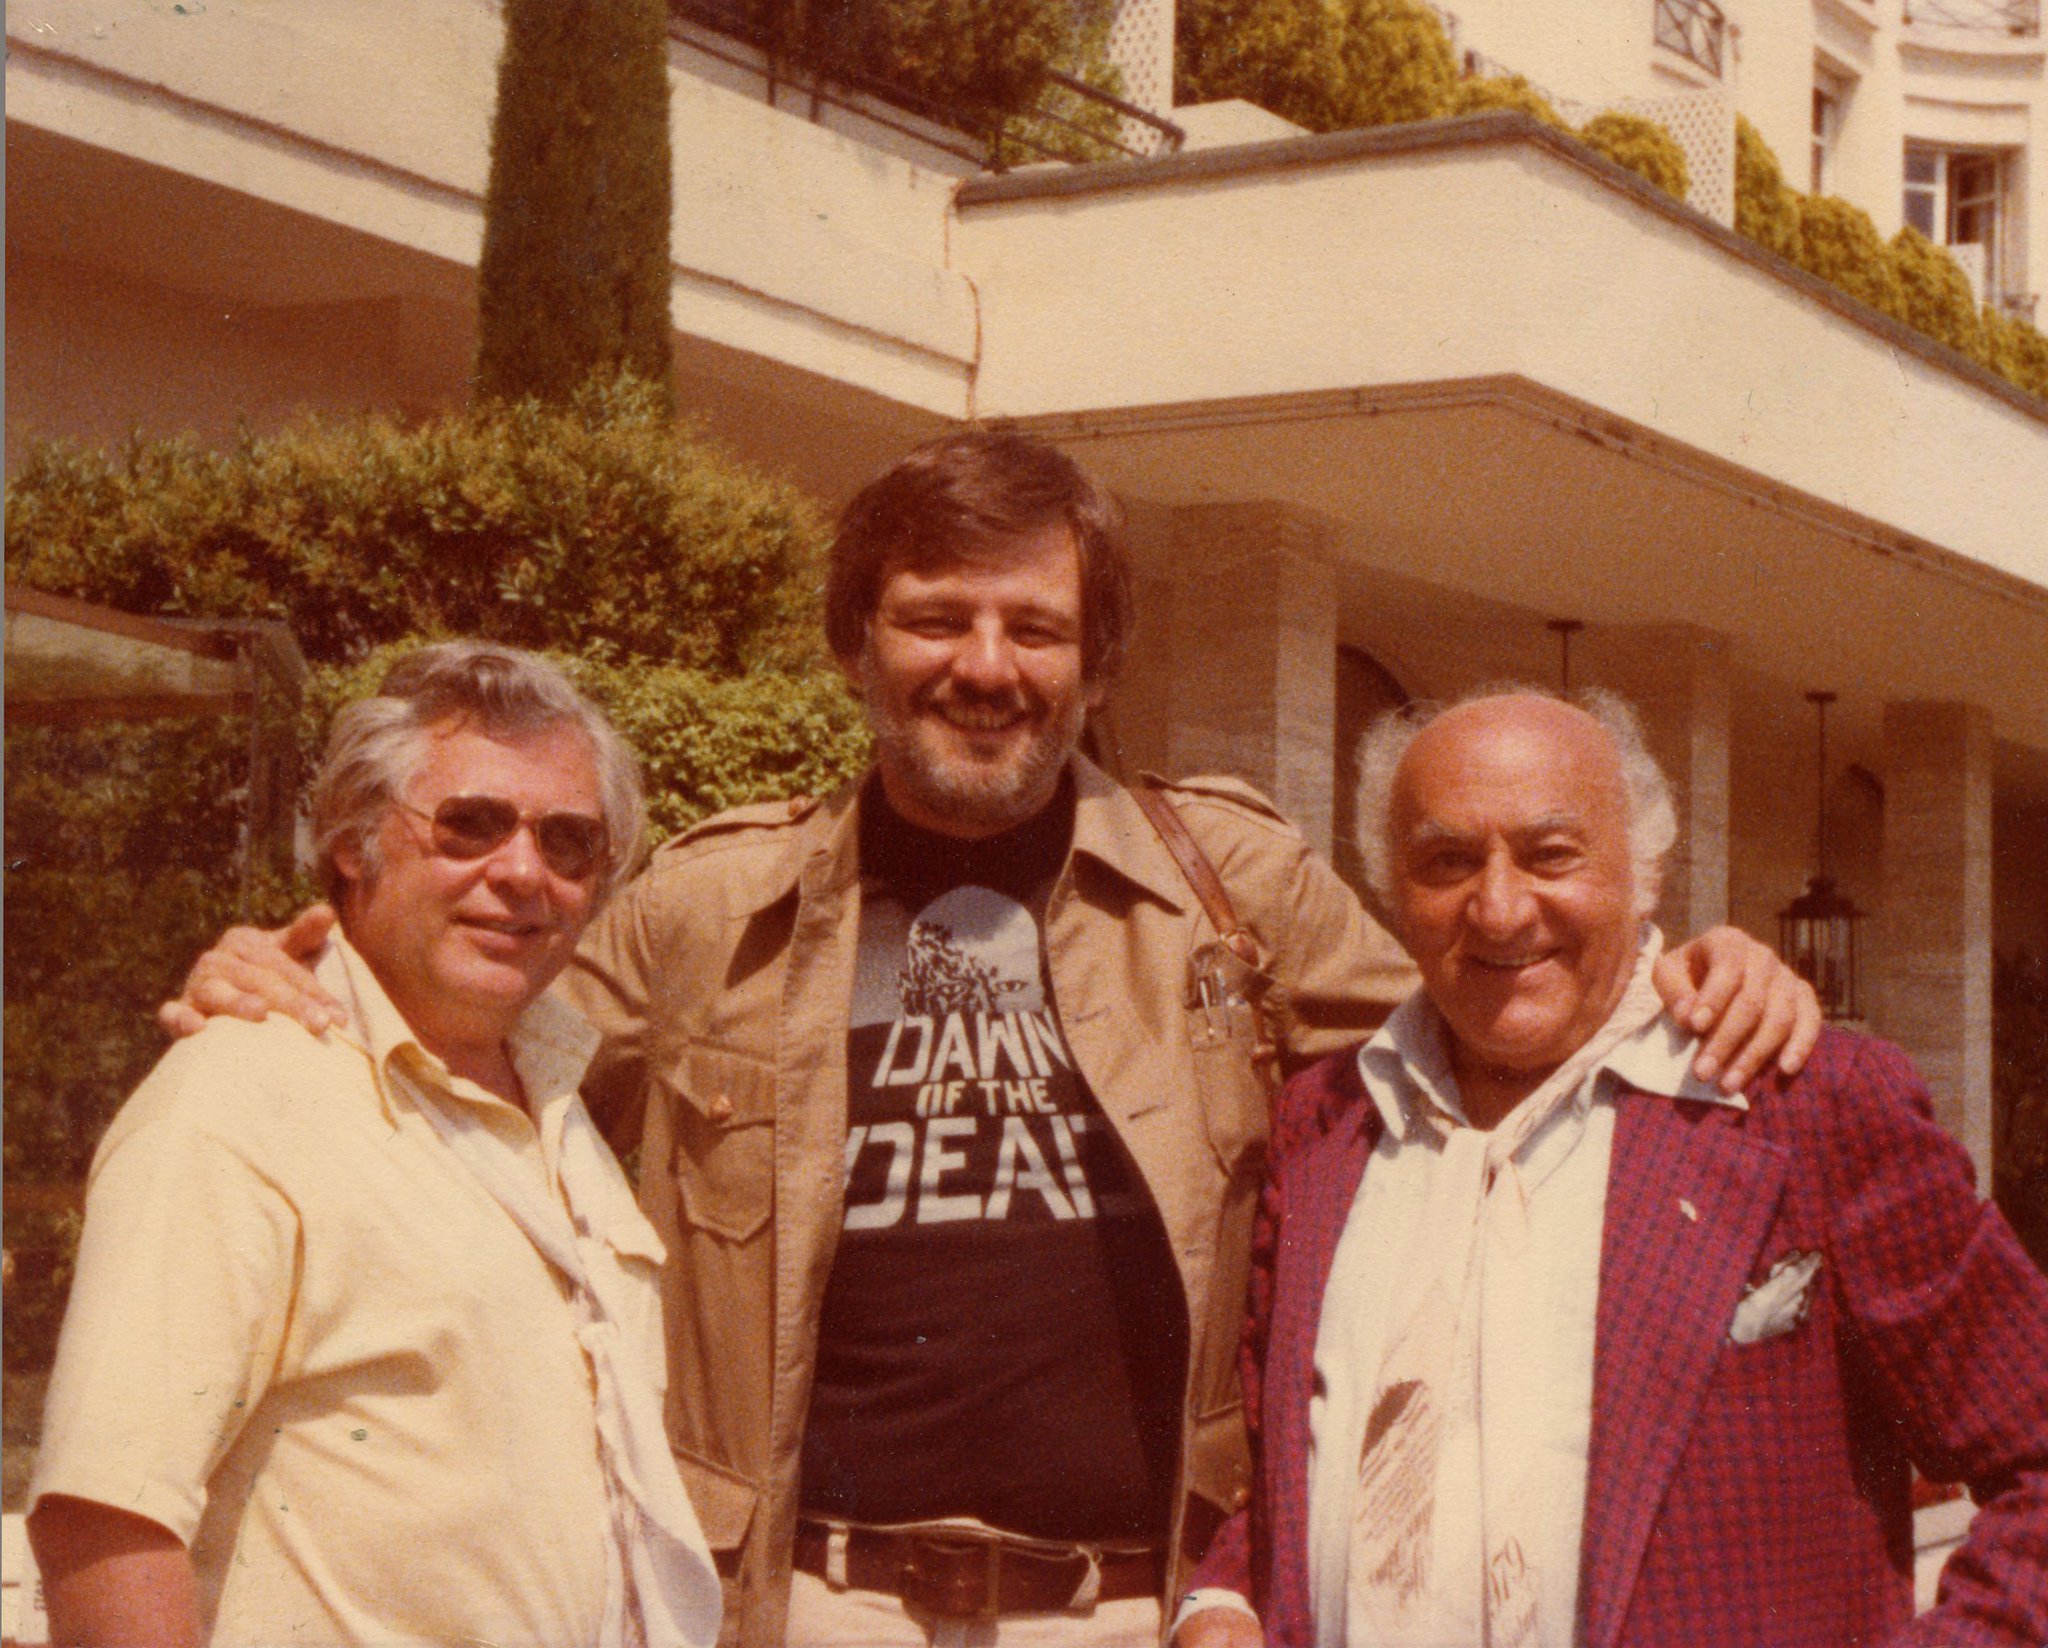 Dawn of the Dead Director George A. Romero with Herbert R. Steinmann and Billy 'Silver Dollar' Baxter in CANNES